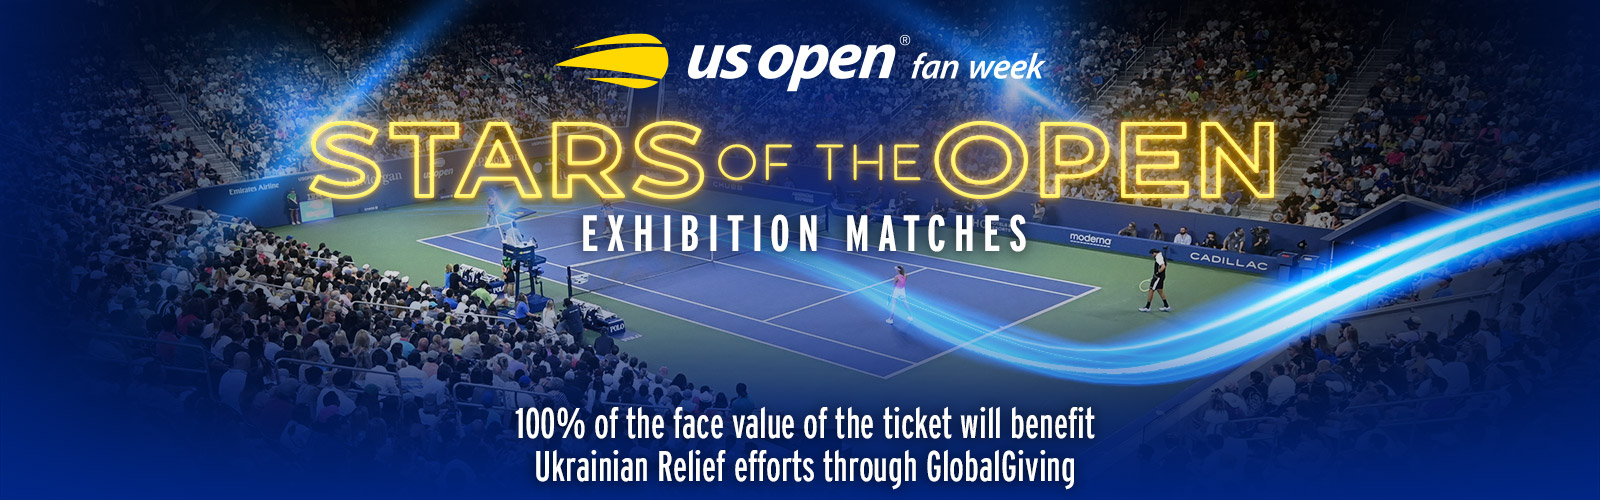 US Open - Stars of the Open - Exhibition Match